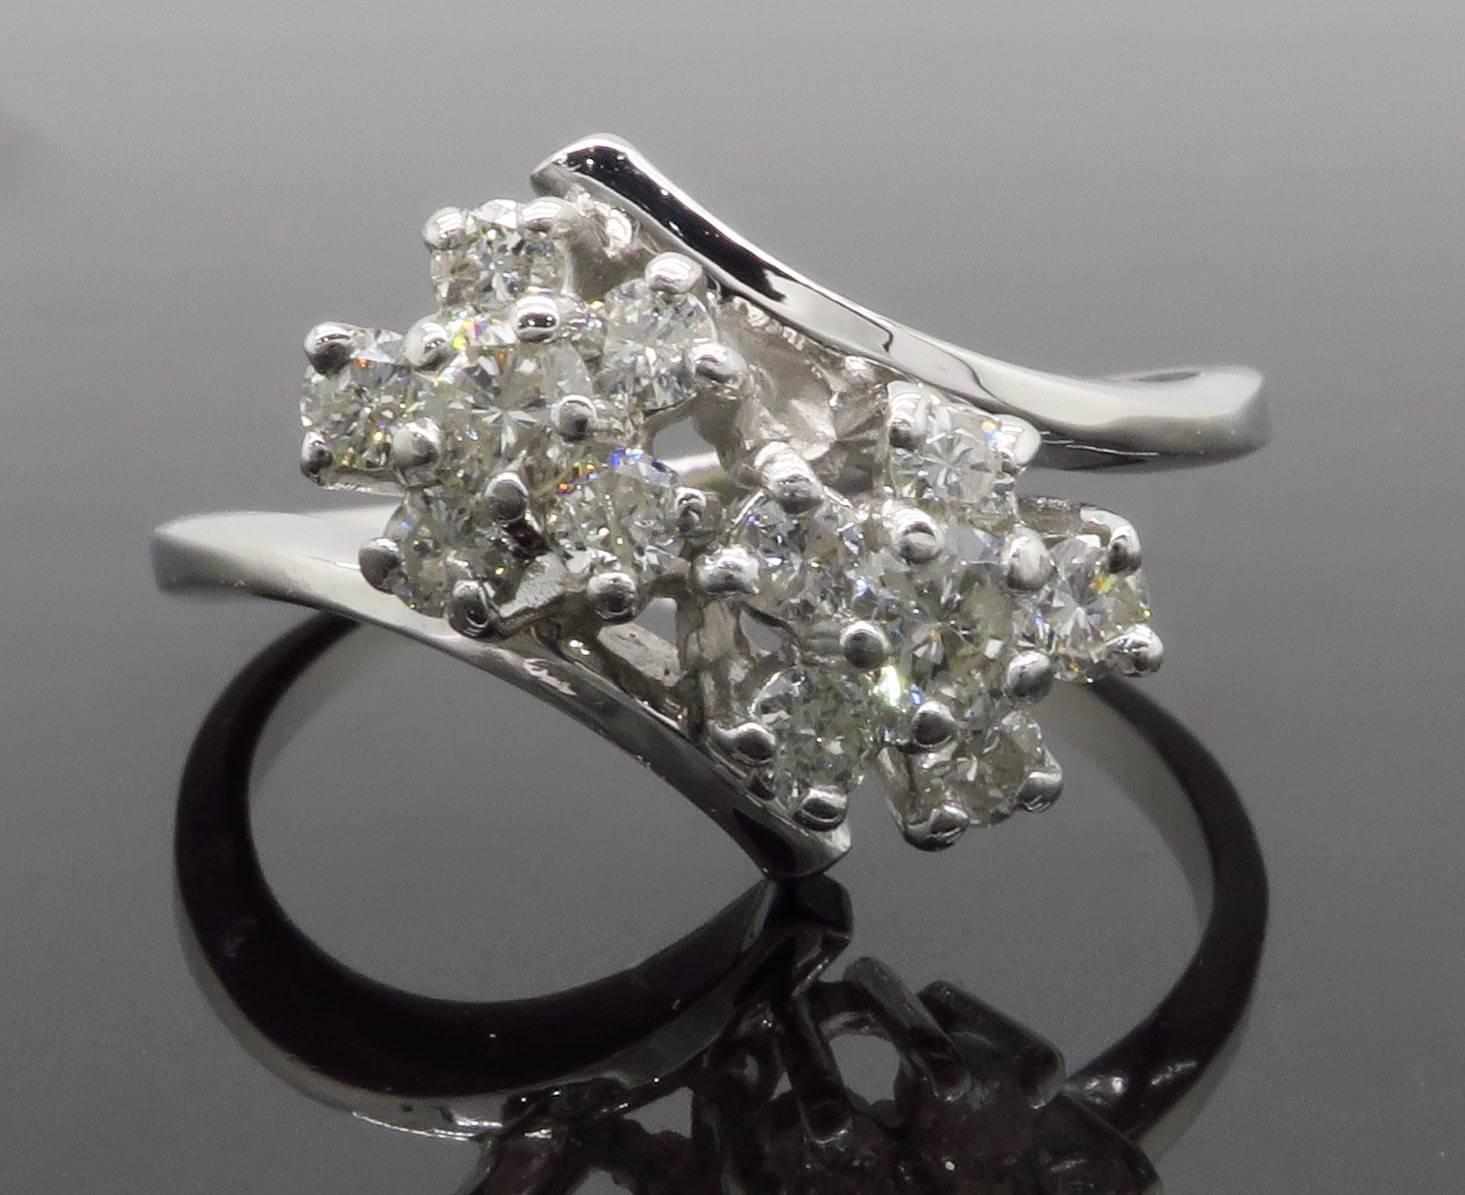 This stunning floral design bypass style ring features 12 Round Brilliant Cut Diamonds. The diamonds display an average color of G-I and an average clarity of I1-I2. There is approximately .51CTW of diamonds in this ring. The 14k white gold ring